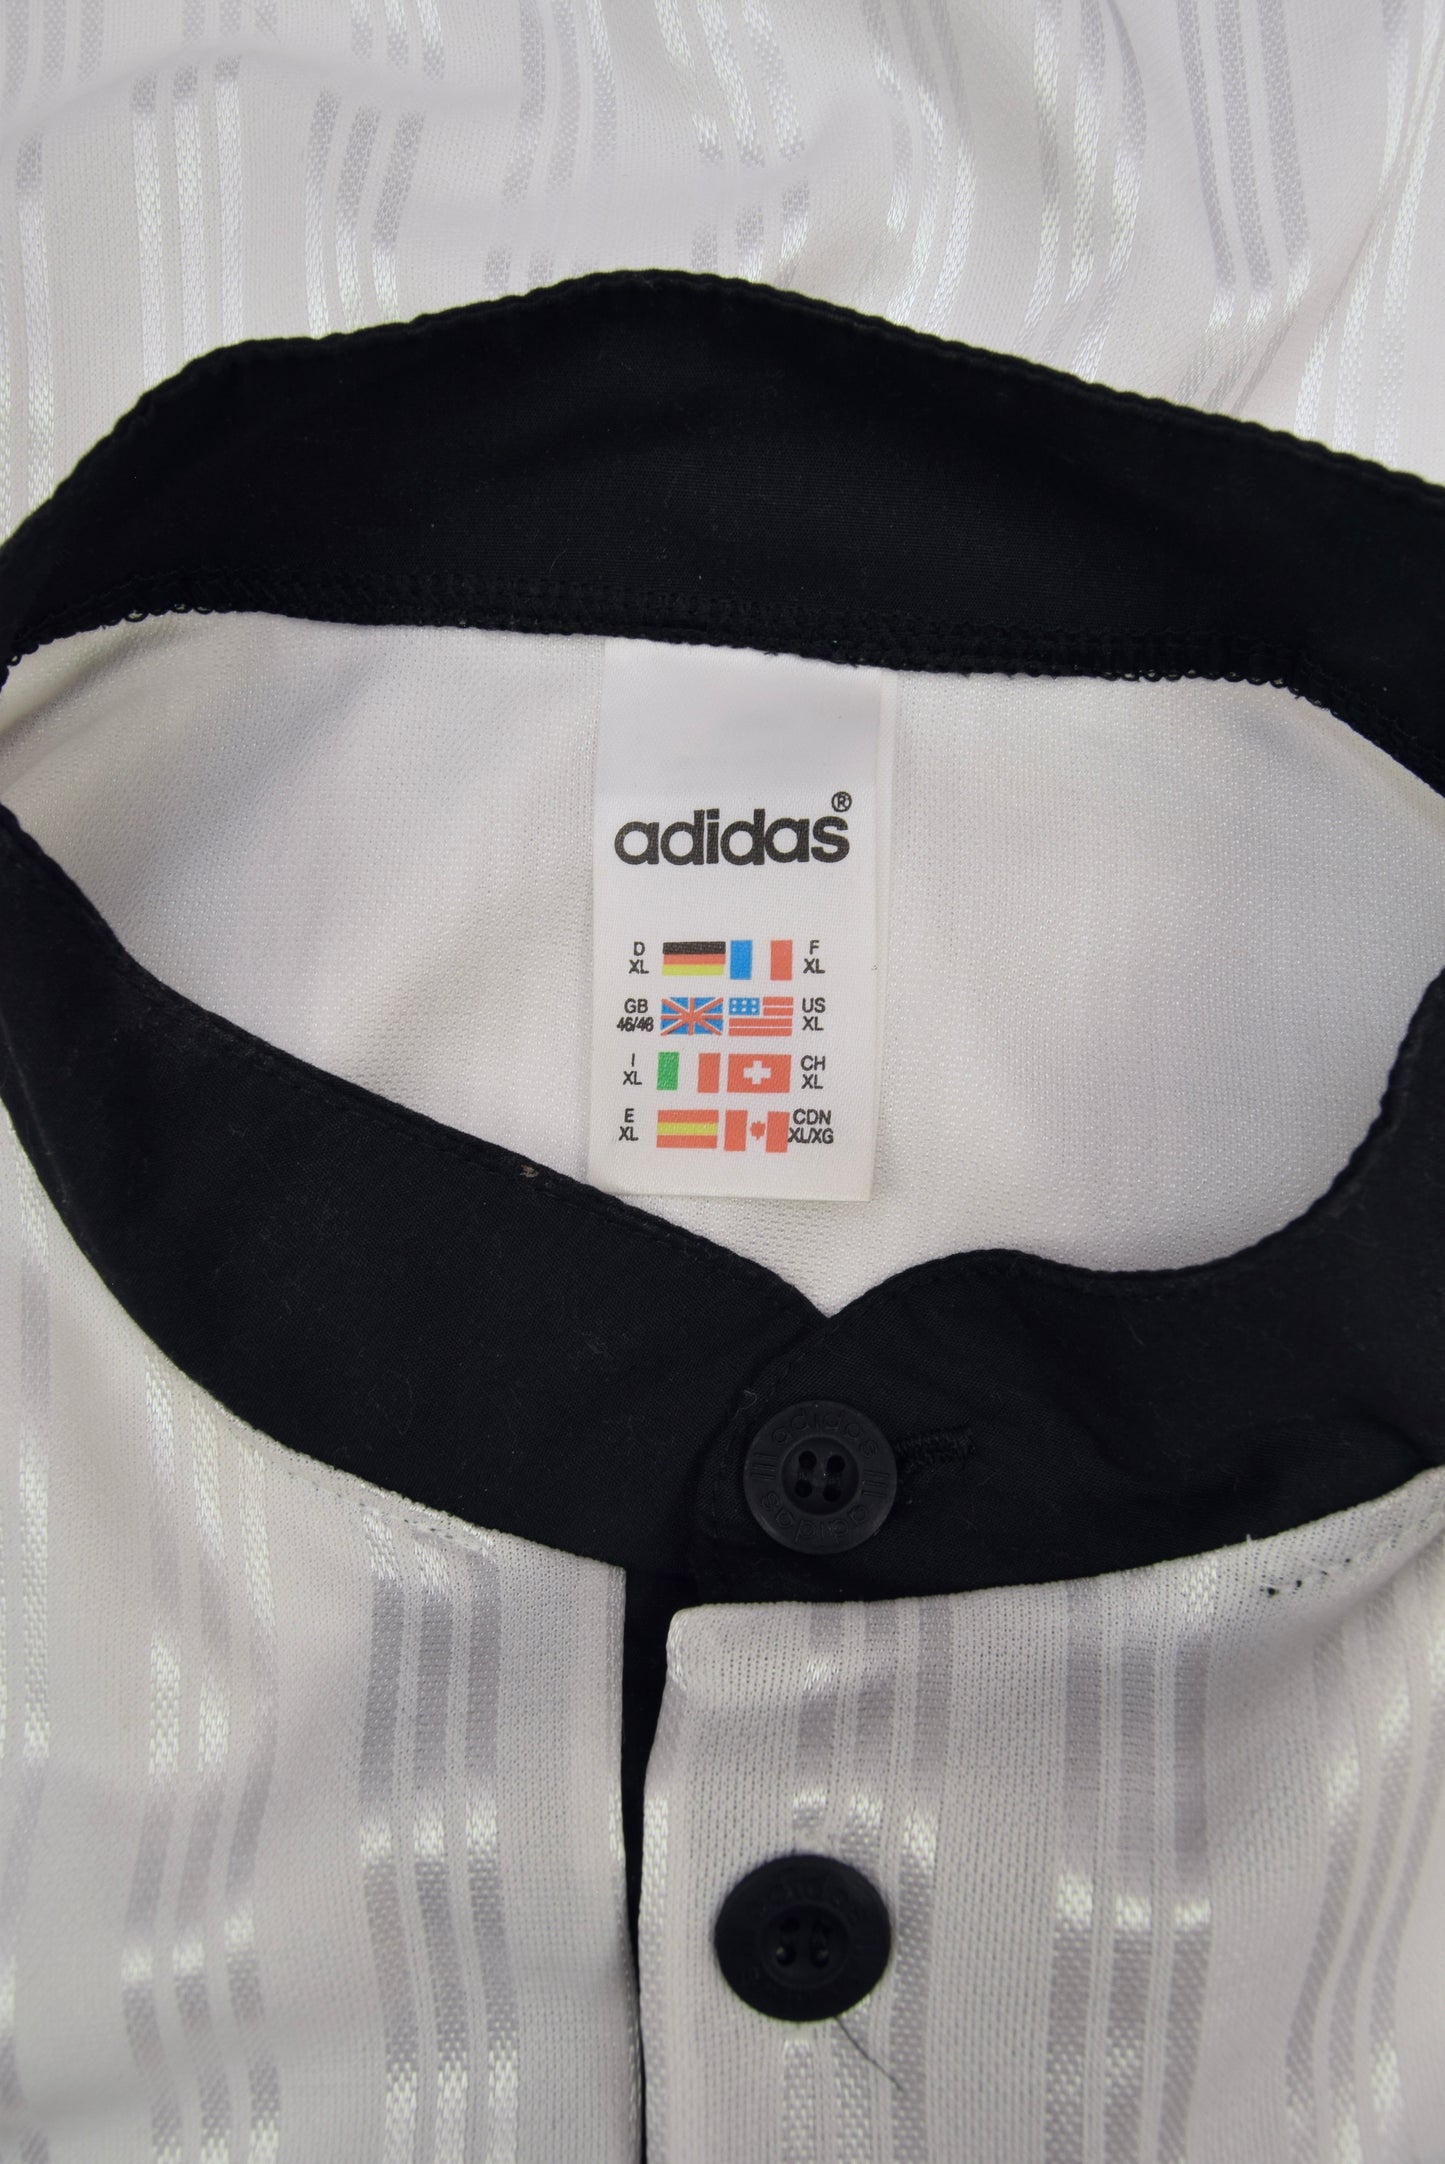 Vintage 90's Adidas Football Shirt Size XL Made in England White Black